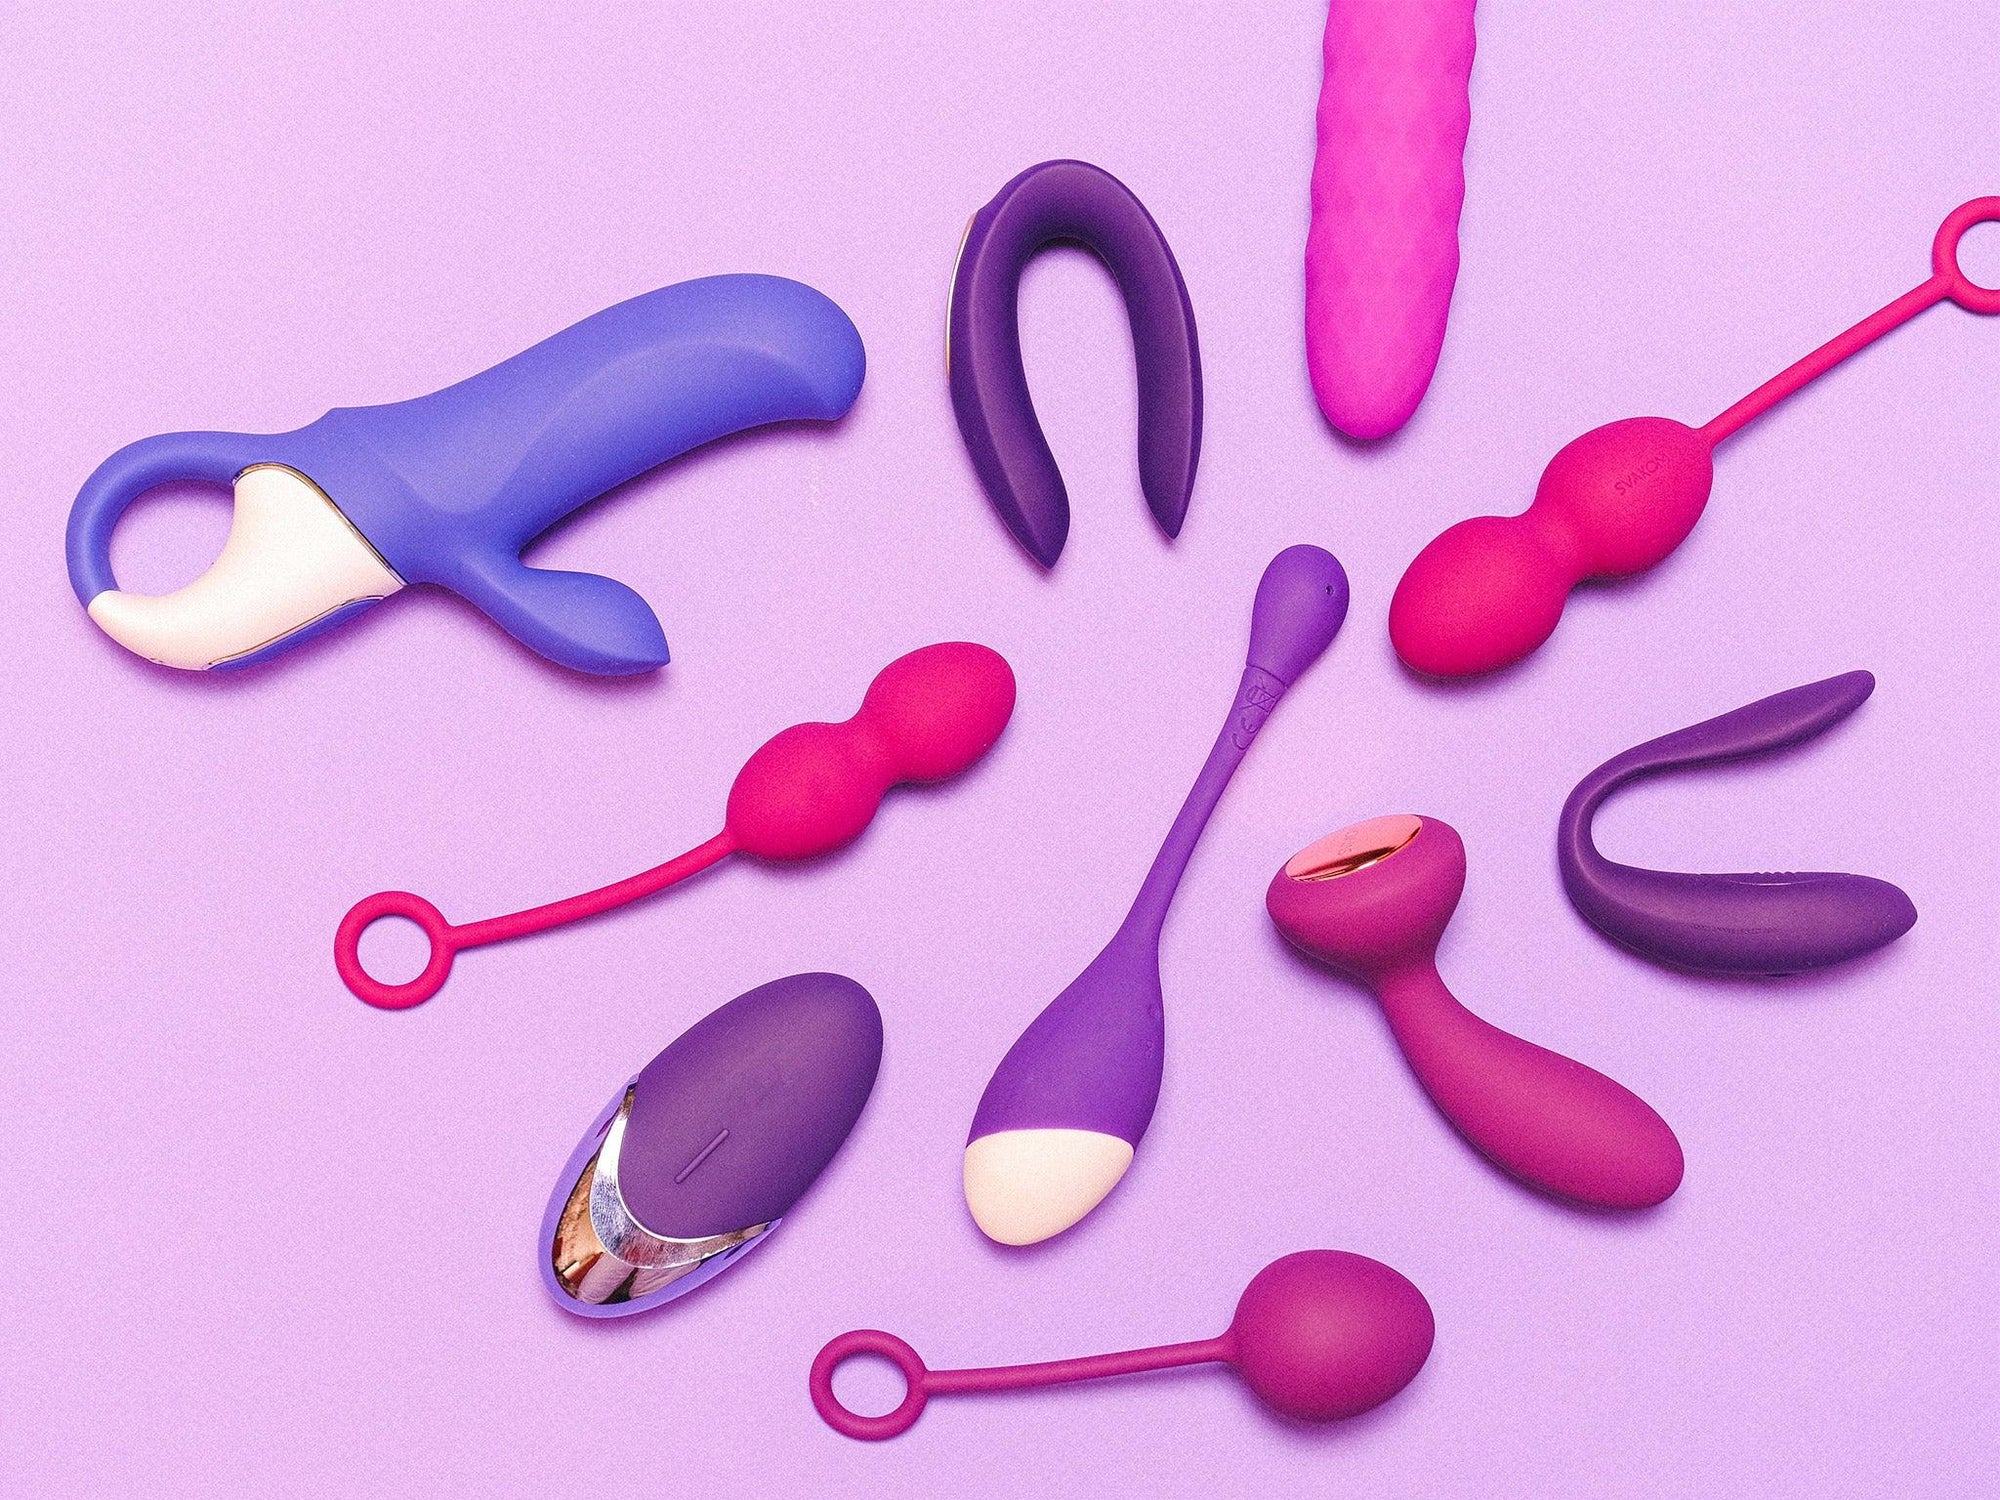 An image of sex toys to represent the common misconceptions around them.